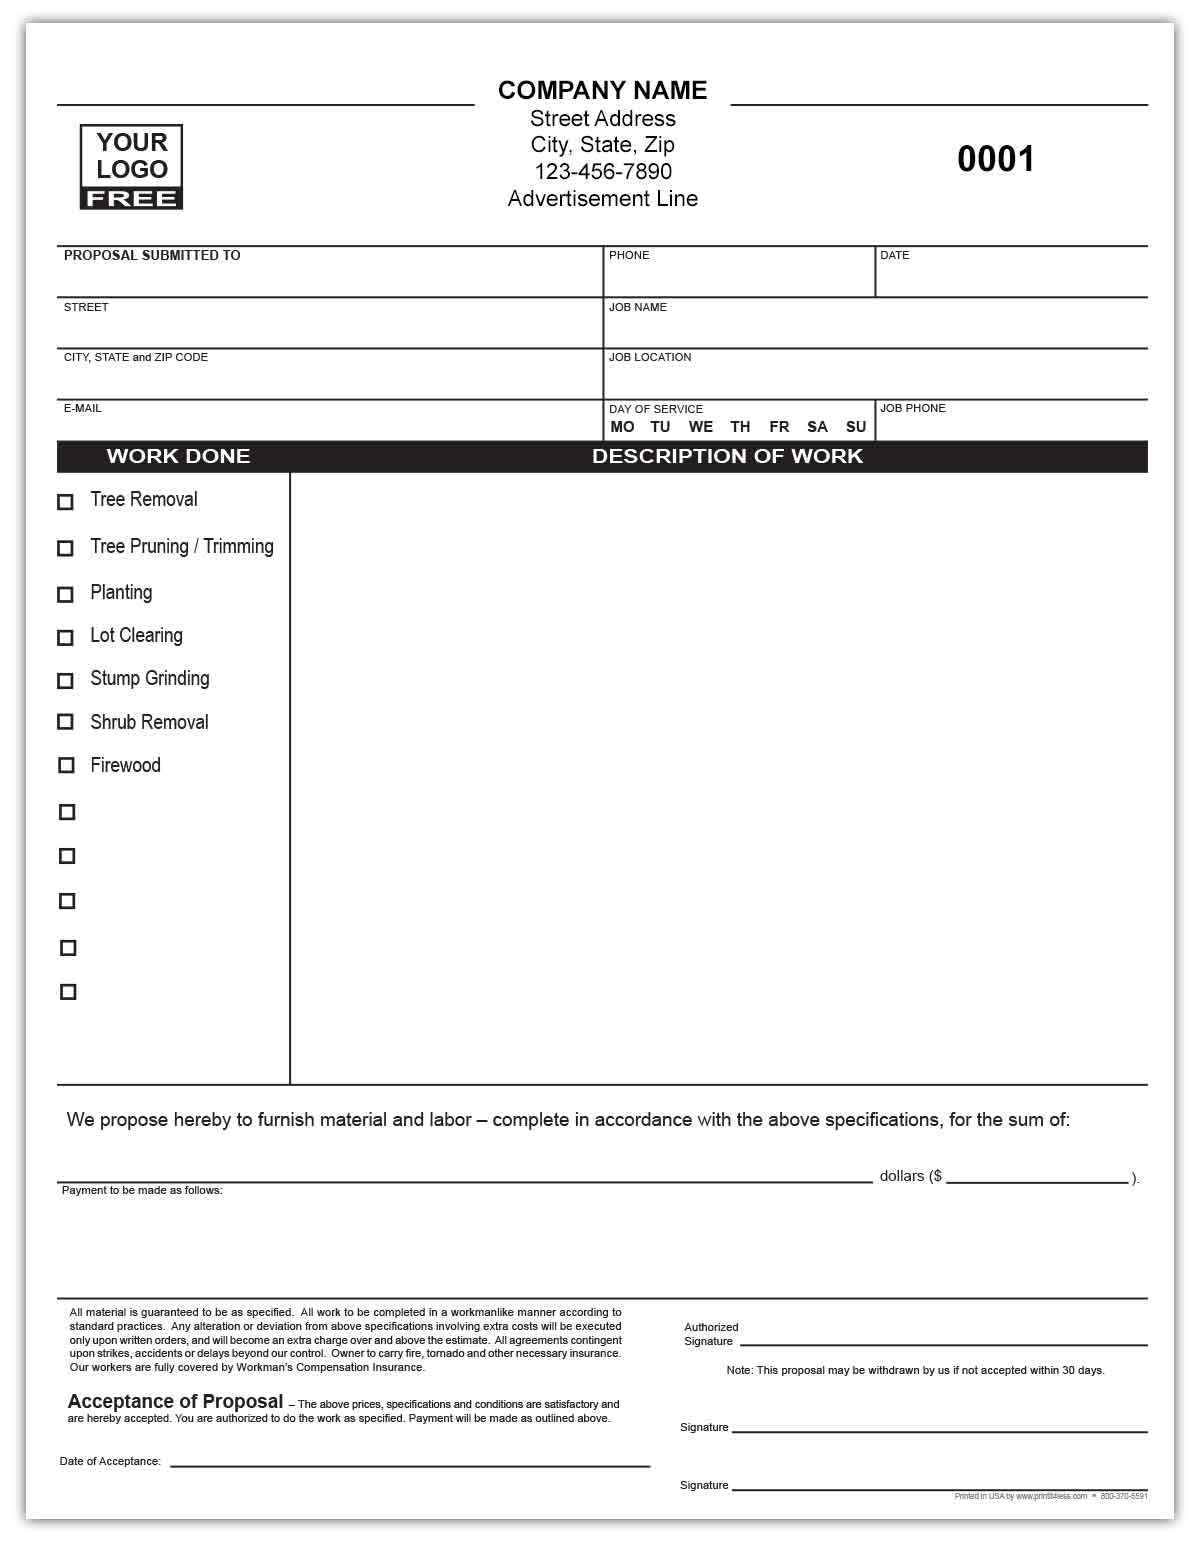 Landscaping Proposal Forms Custom Business Forms